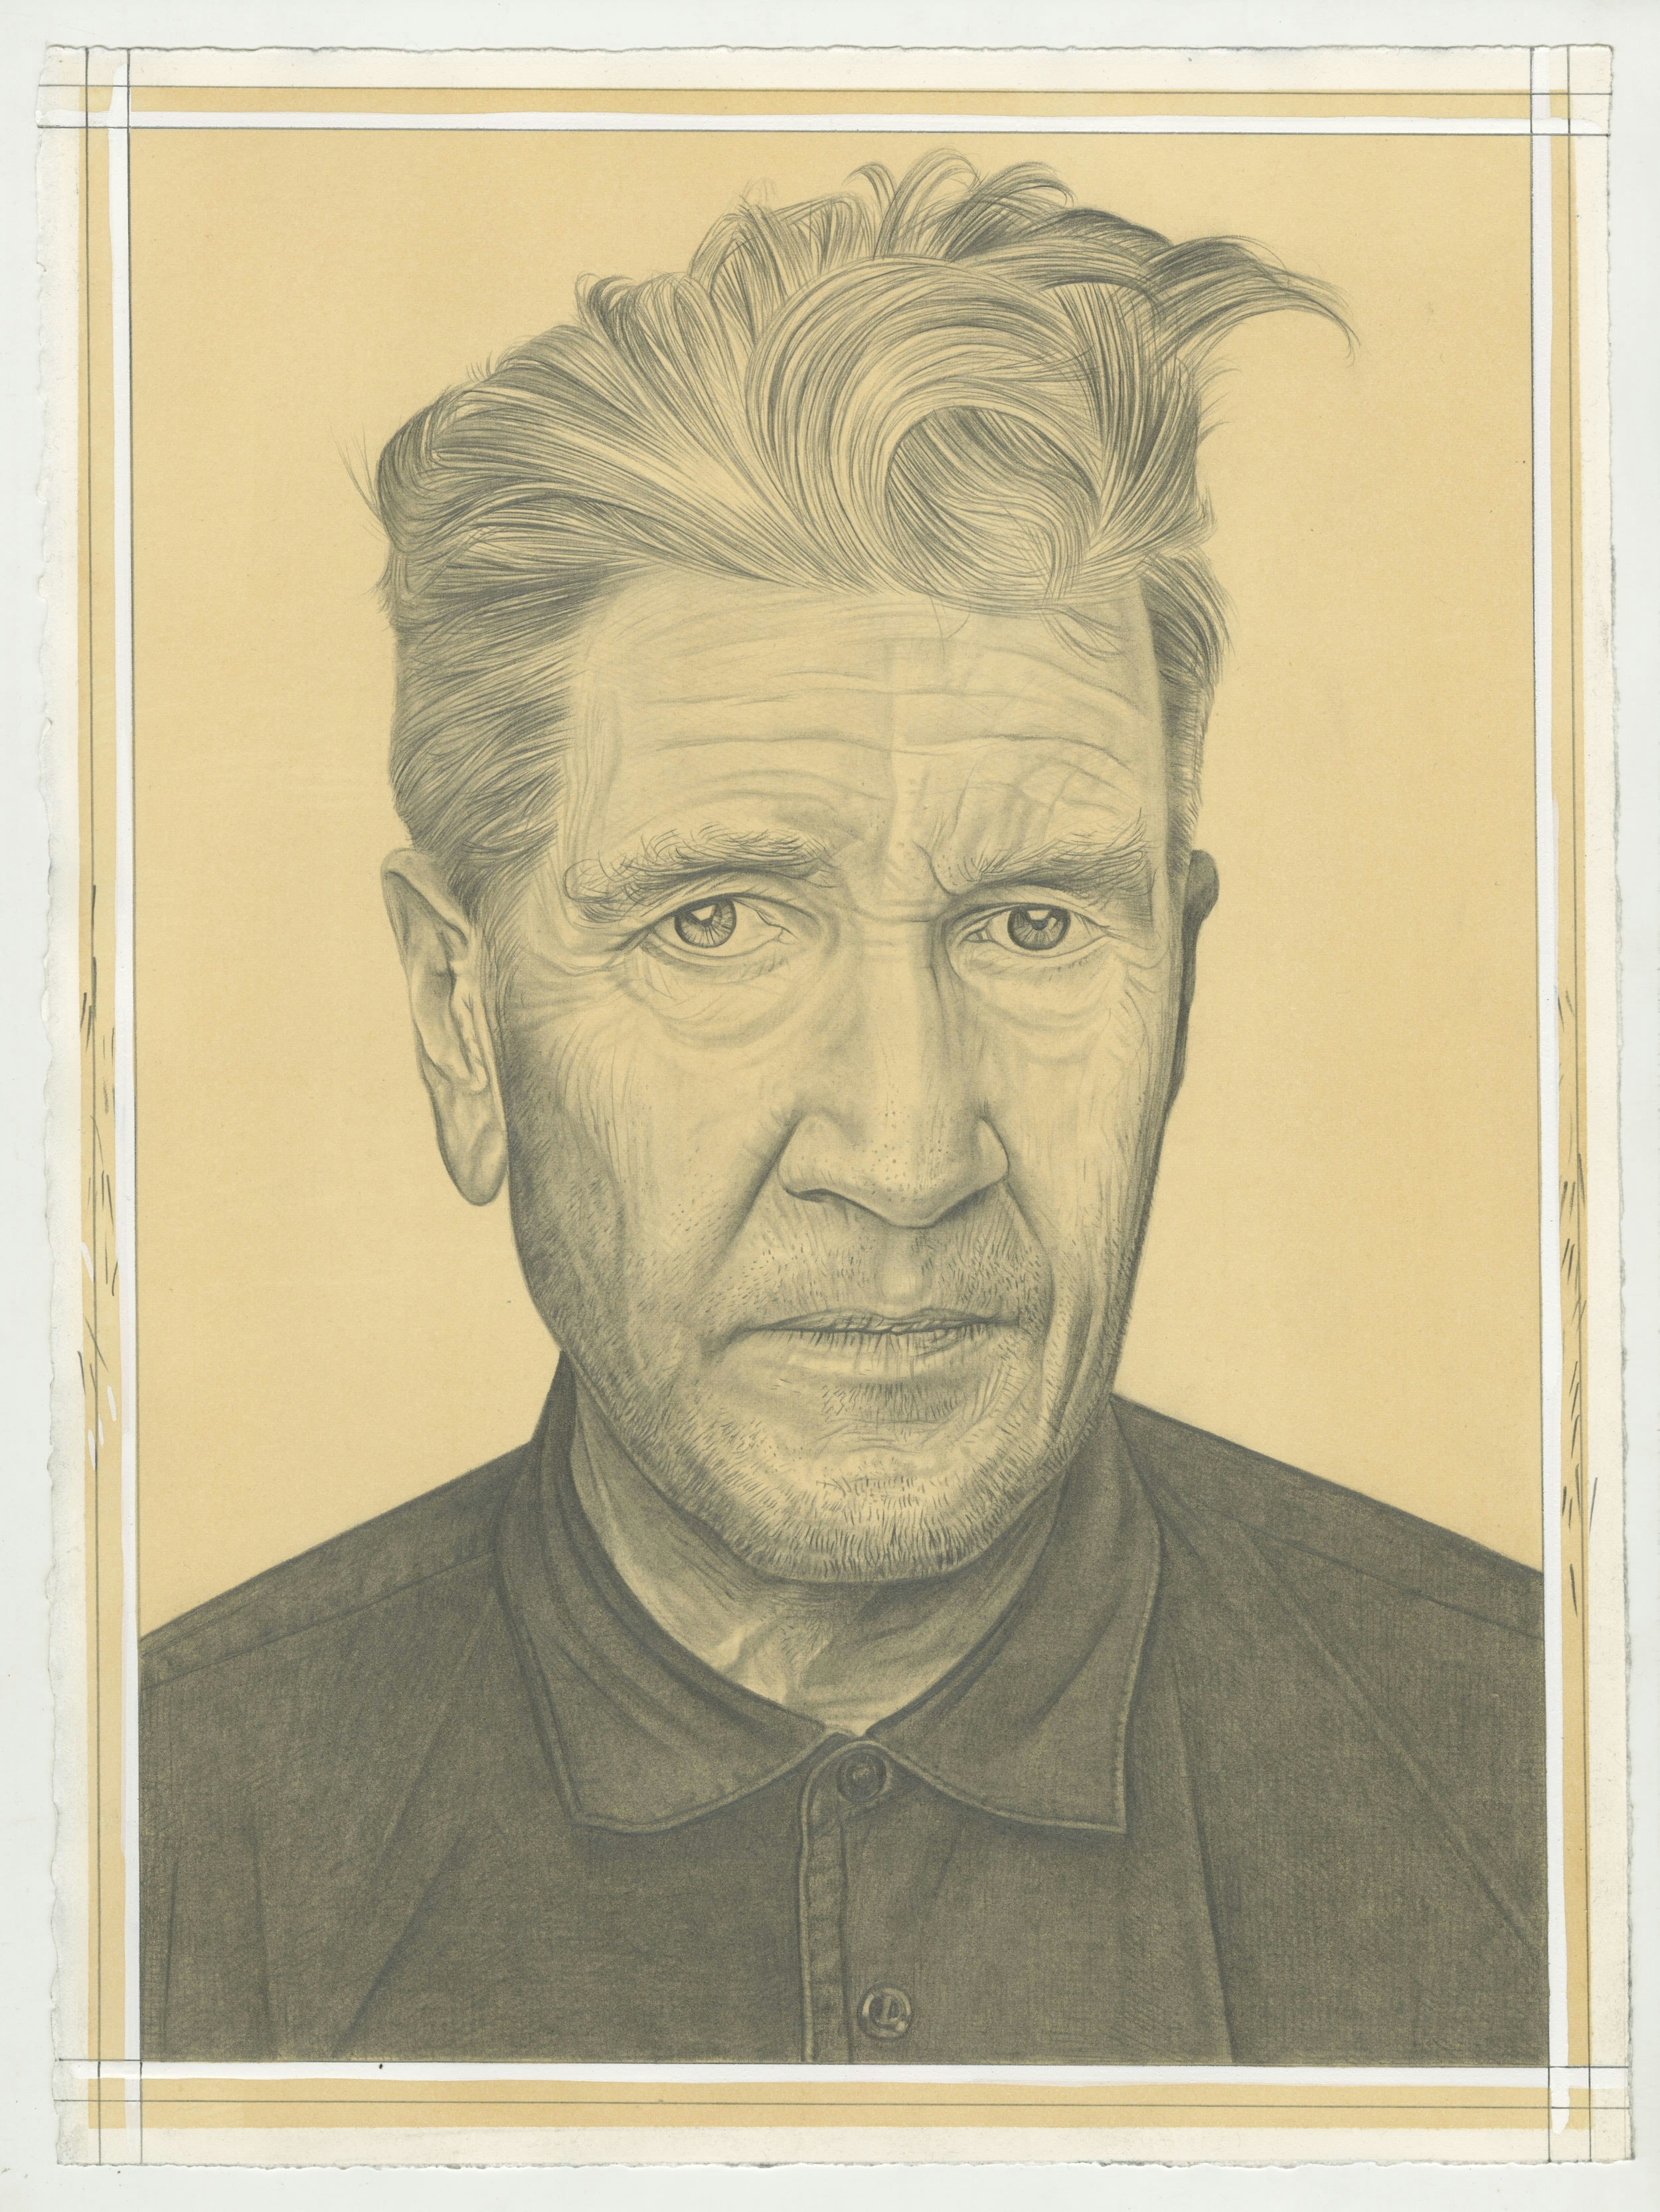 Portrait of David Lynch. Pencil on paper by Phong Bui. 